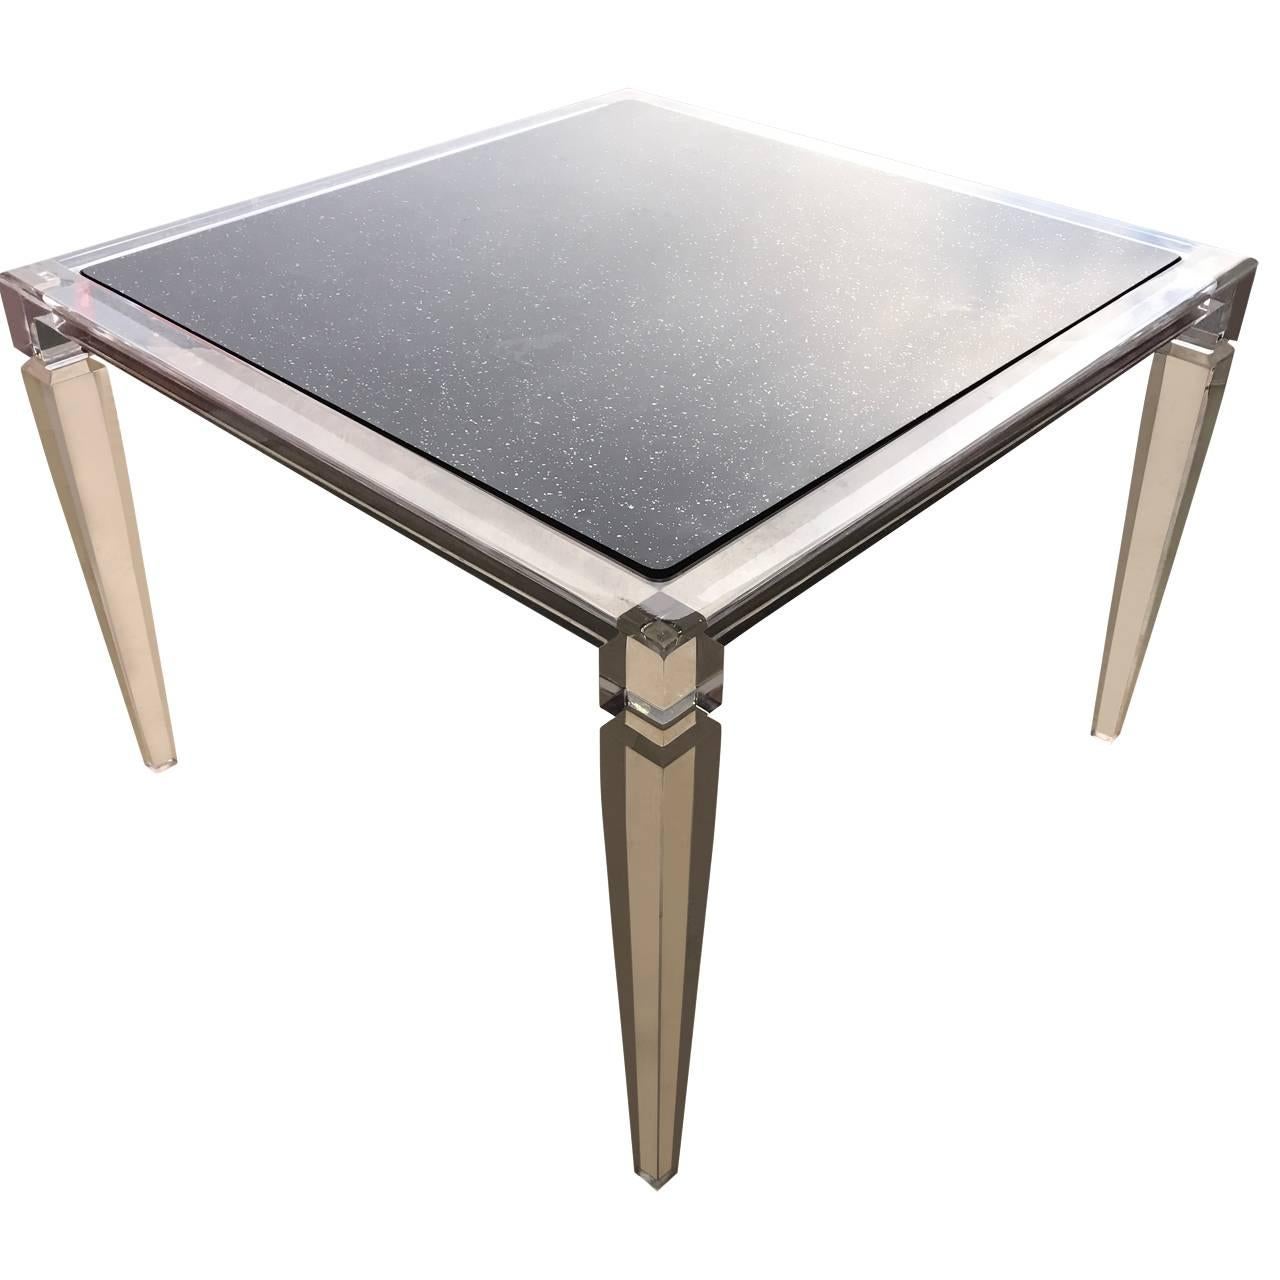 One classic and beautiful Lucite game-table.
Option of installing a 3/4 inch glass or marble top instead of the original ceramic top 

Table height measures: 28.75 inches.
 
   